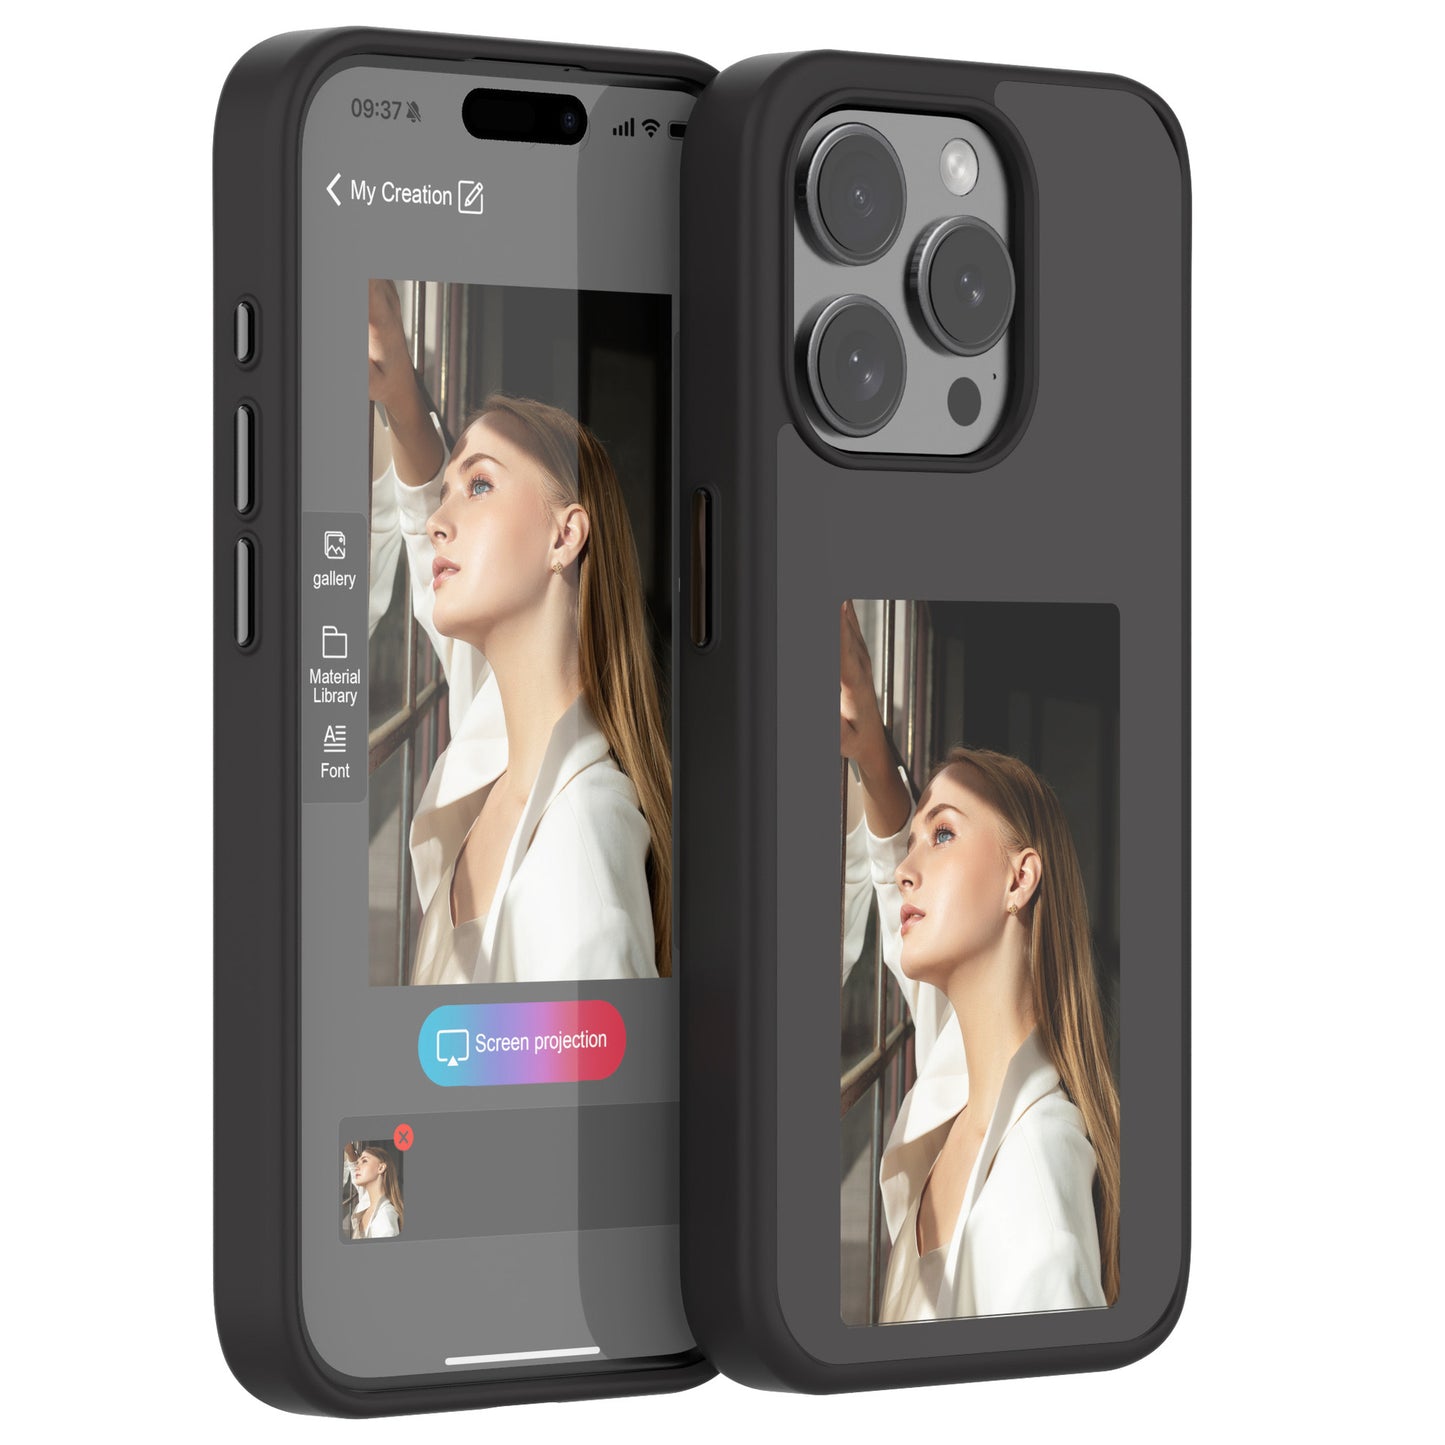 Smart Ink Case iPhone Case - ReInk your Case in seconds!